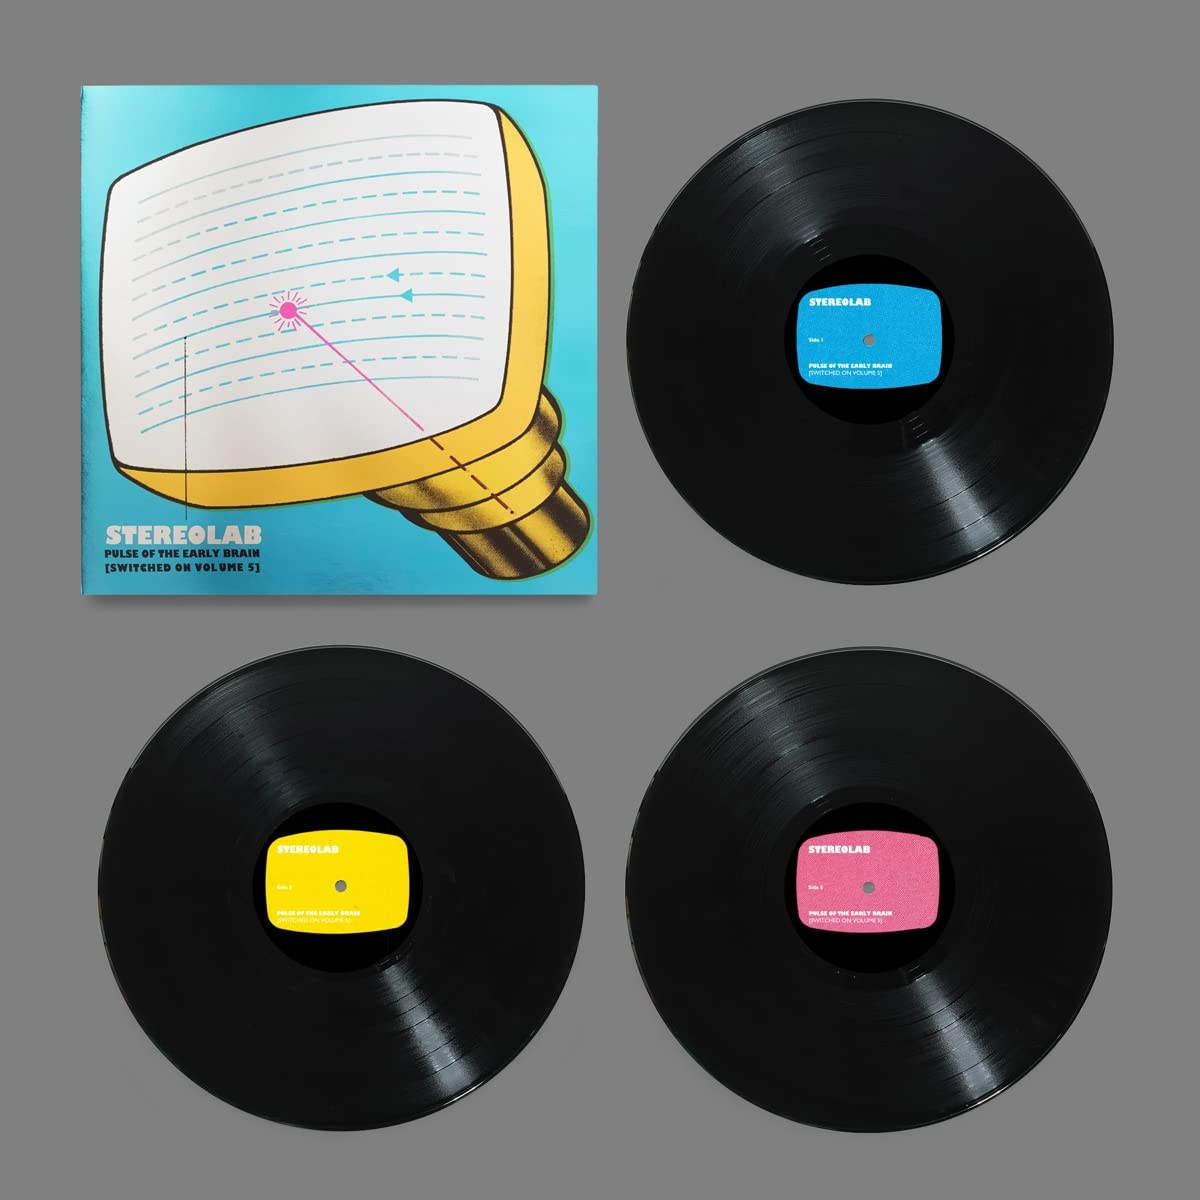 Stereolab "Pulse Of The Early Brain (Switched On Vol.5) 3LP